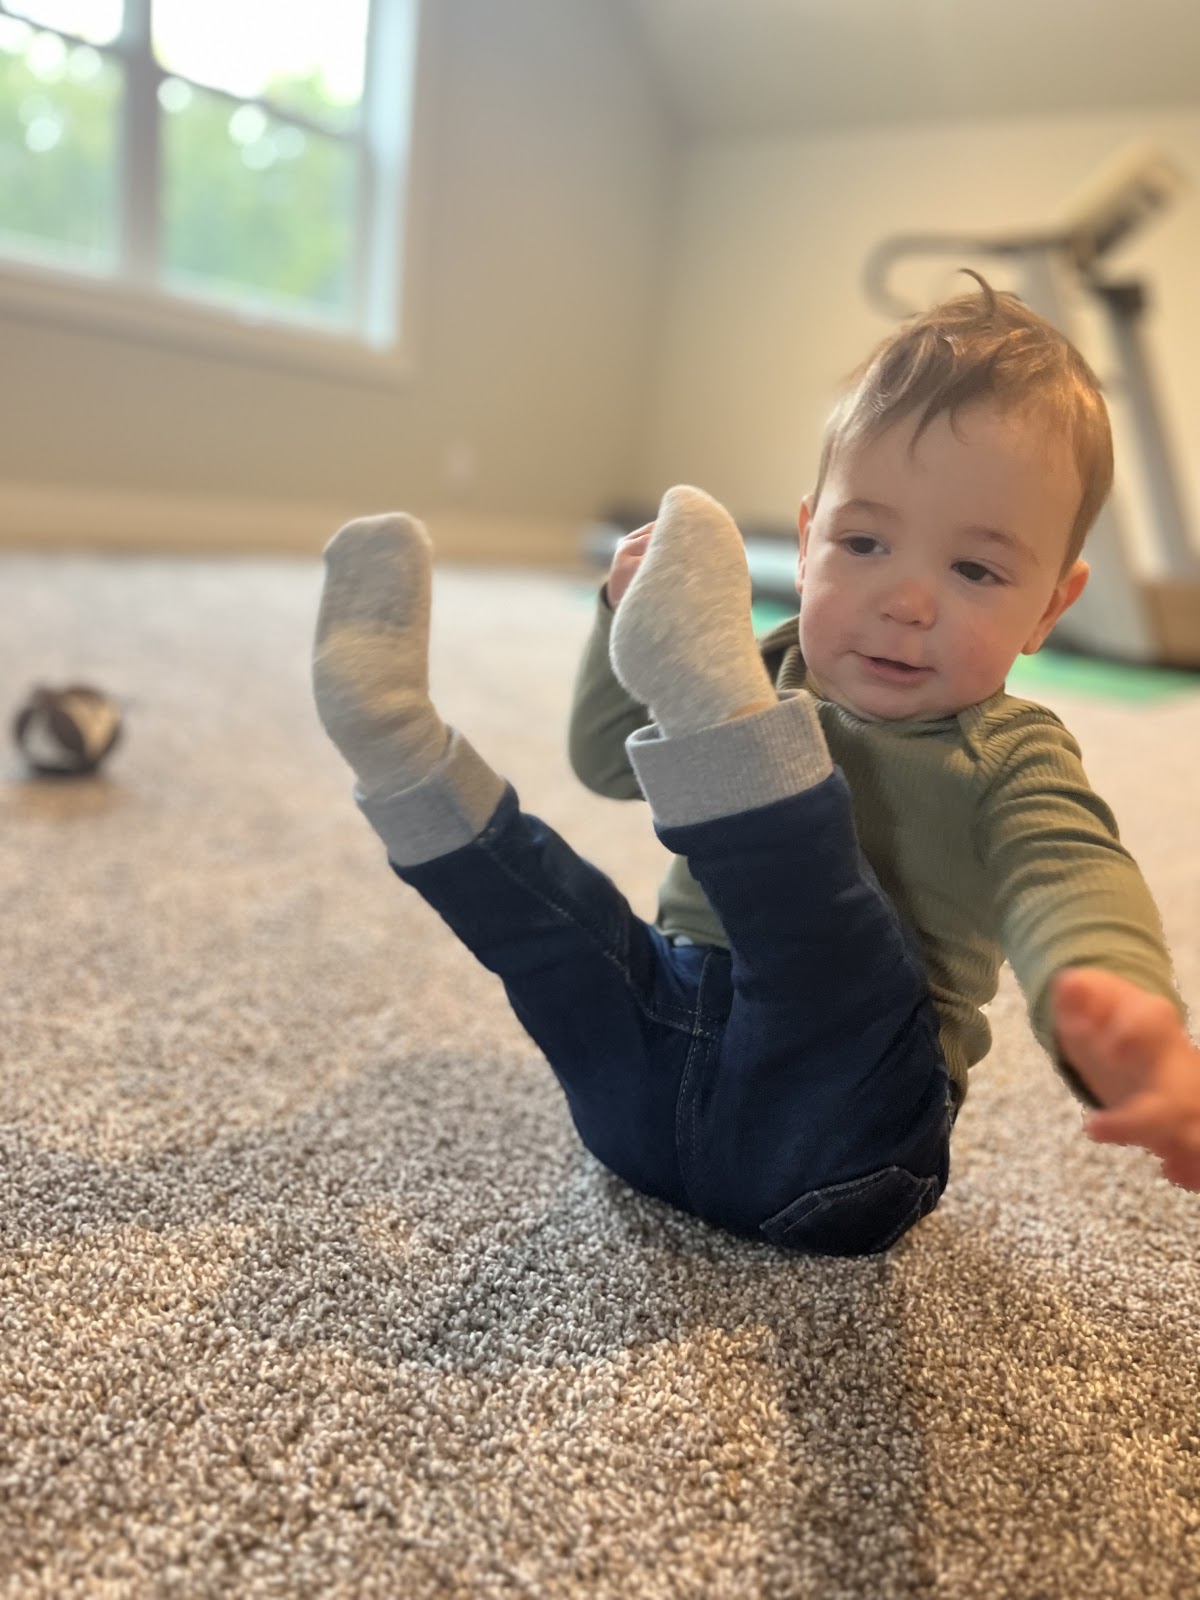 7-month-old mobility and strength